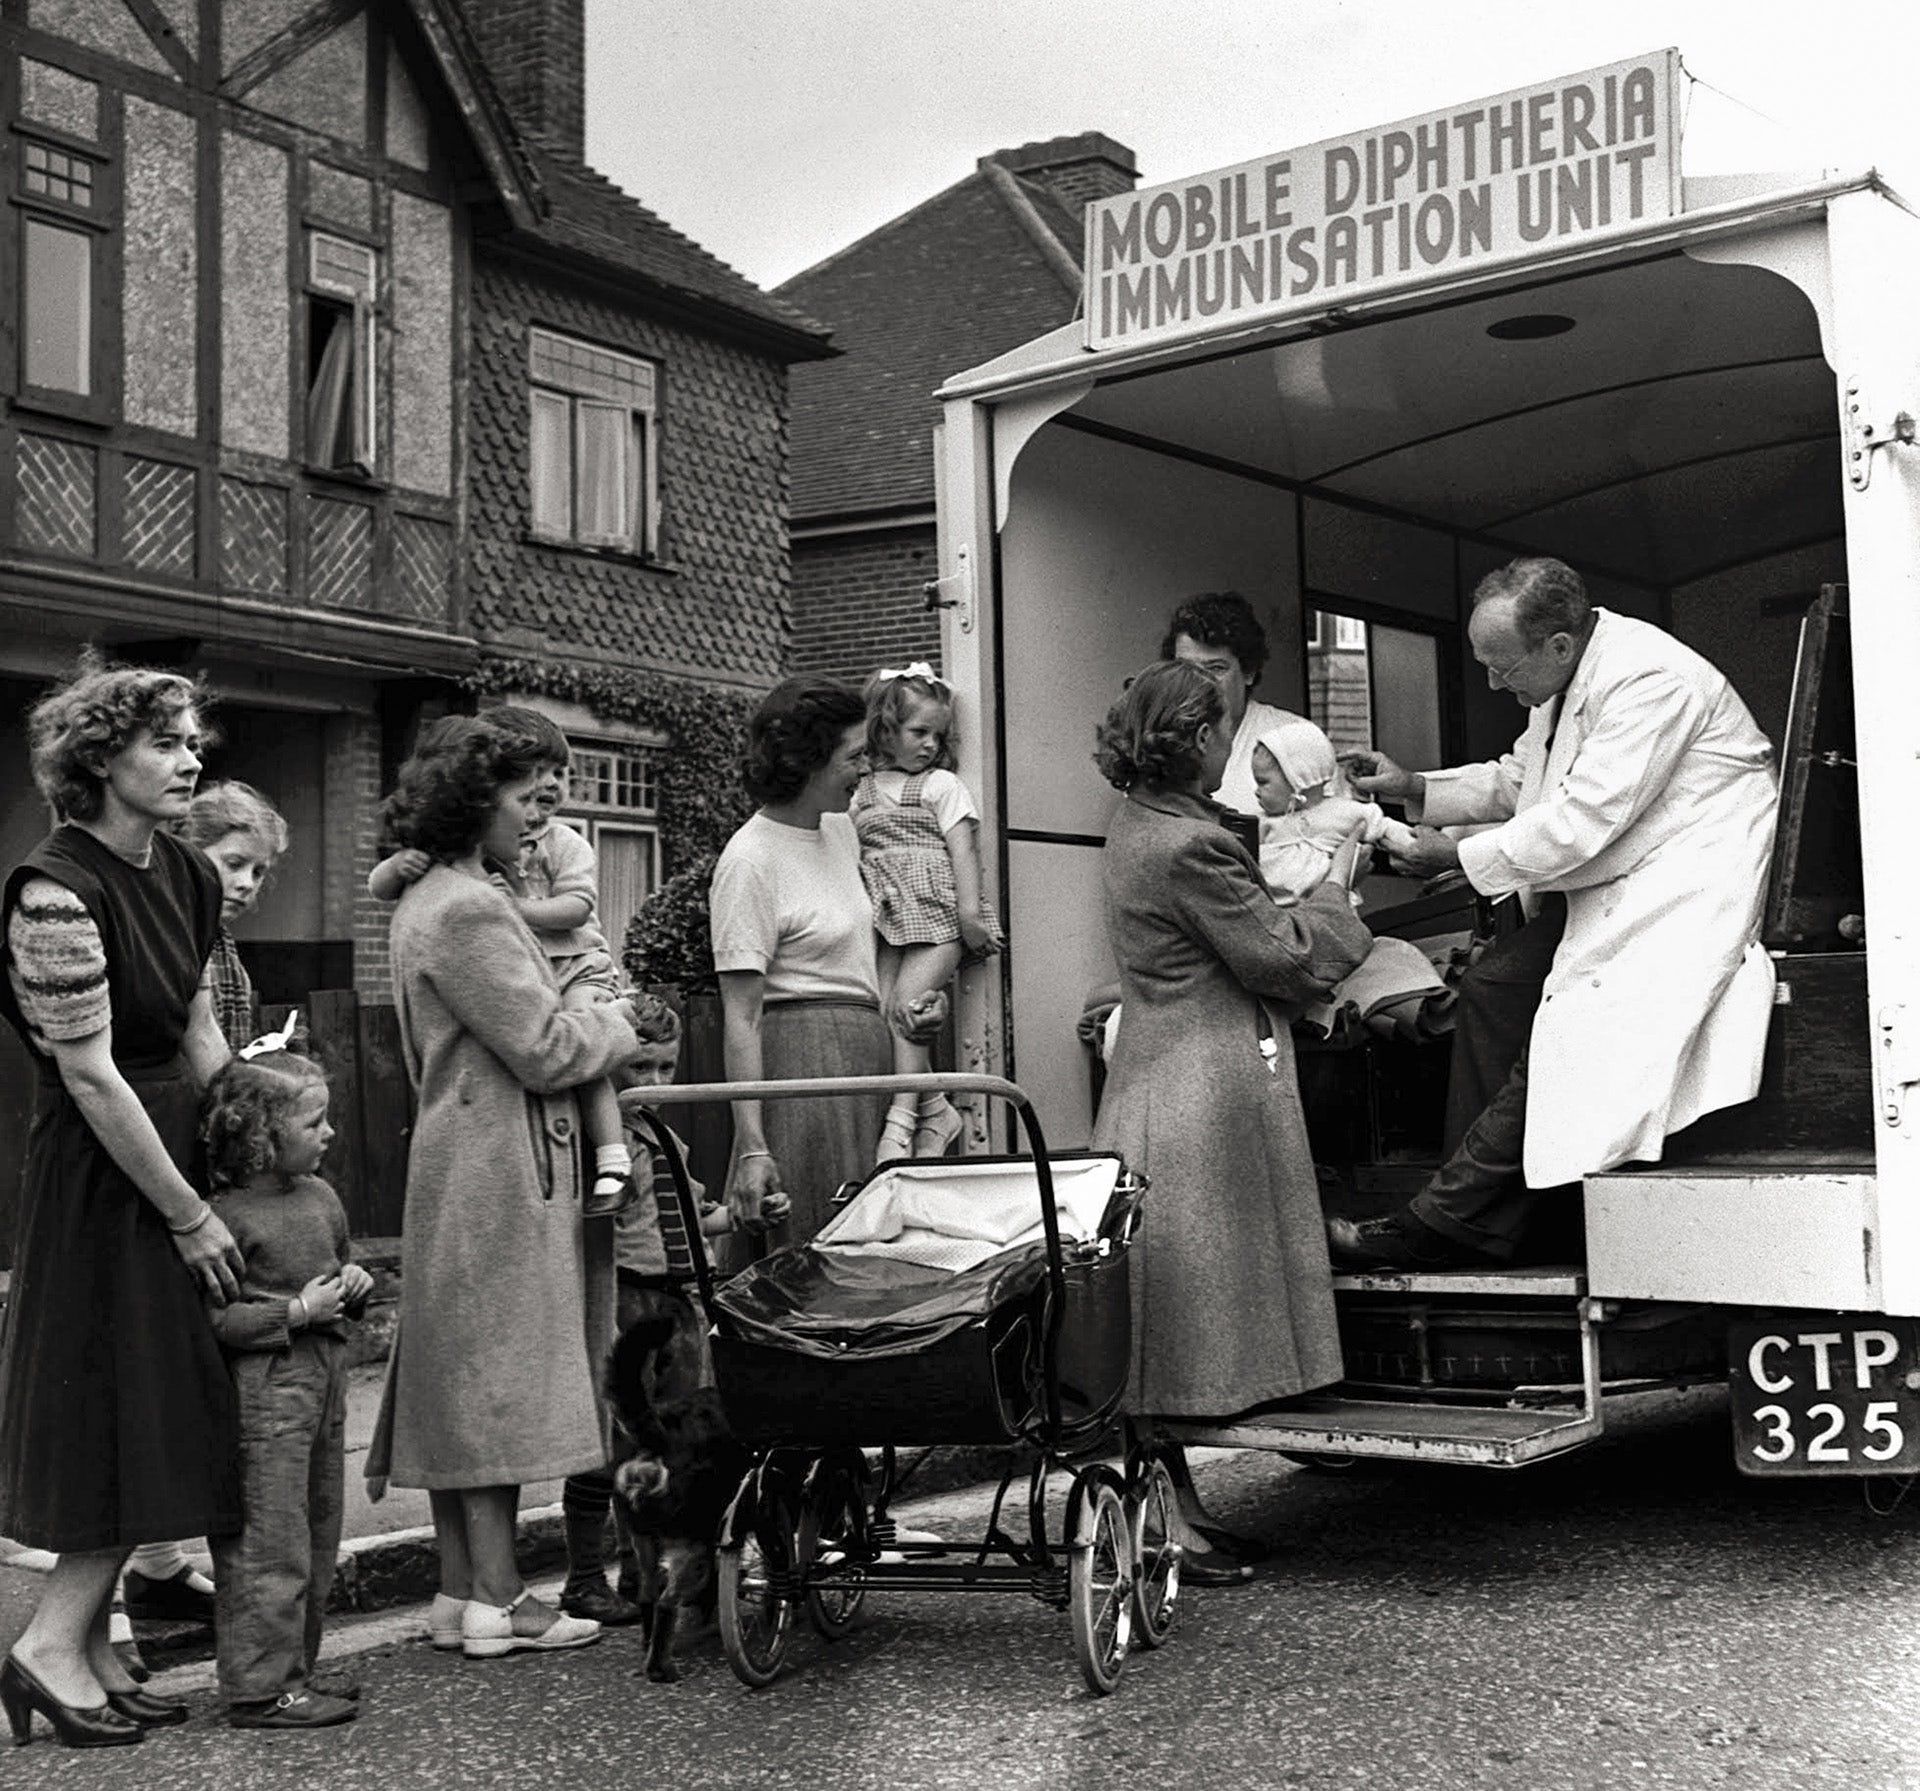 Black and white photograph of people holding children as they queue up for a mobile vaccination centre in the back of a van